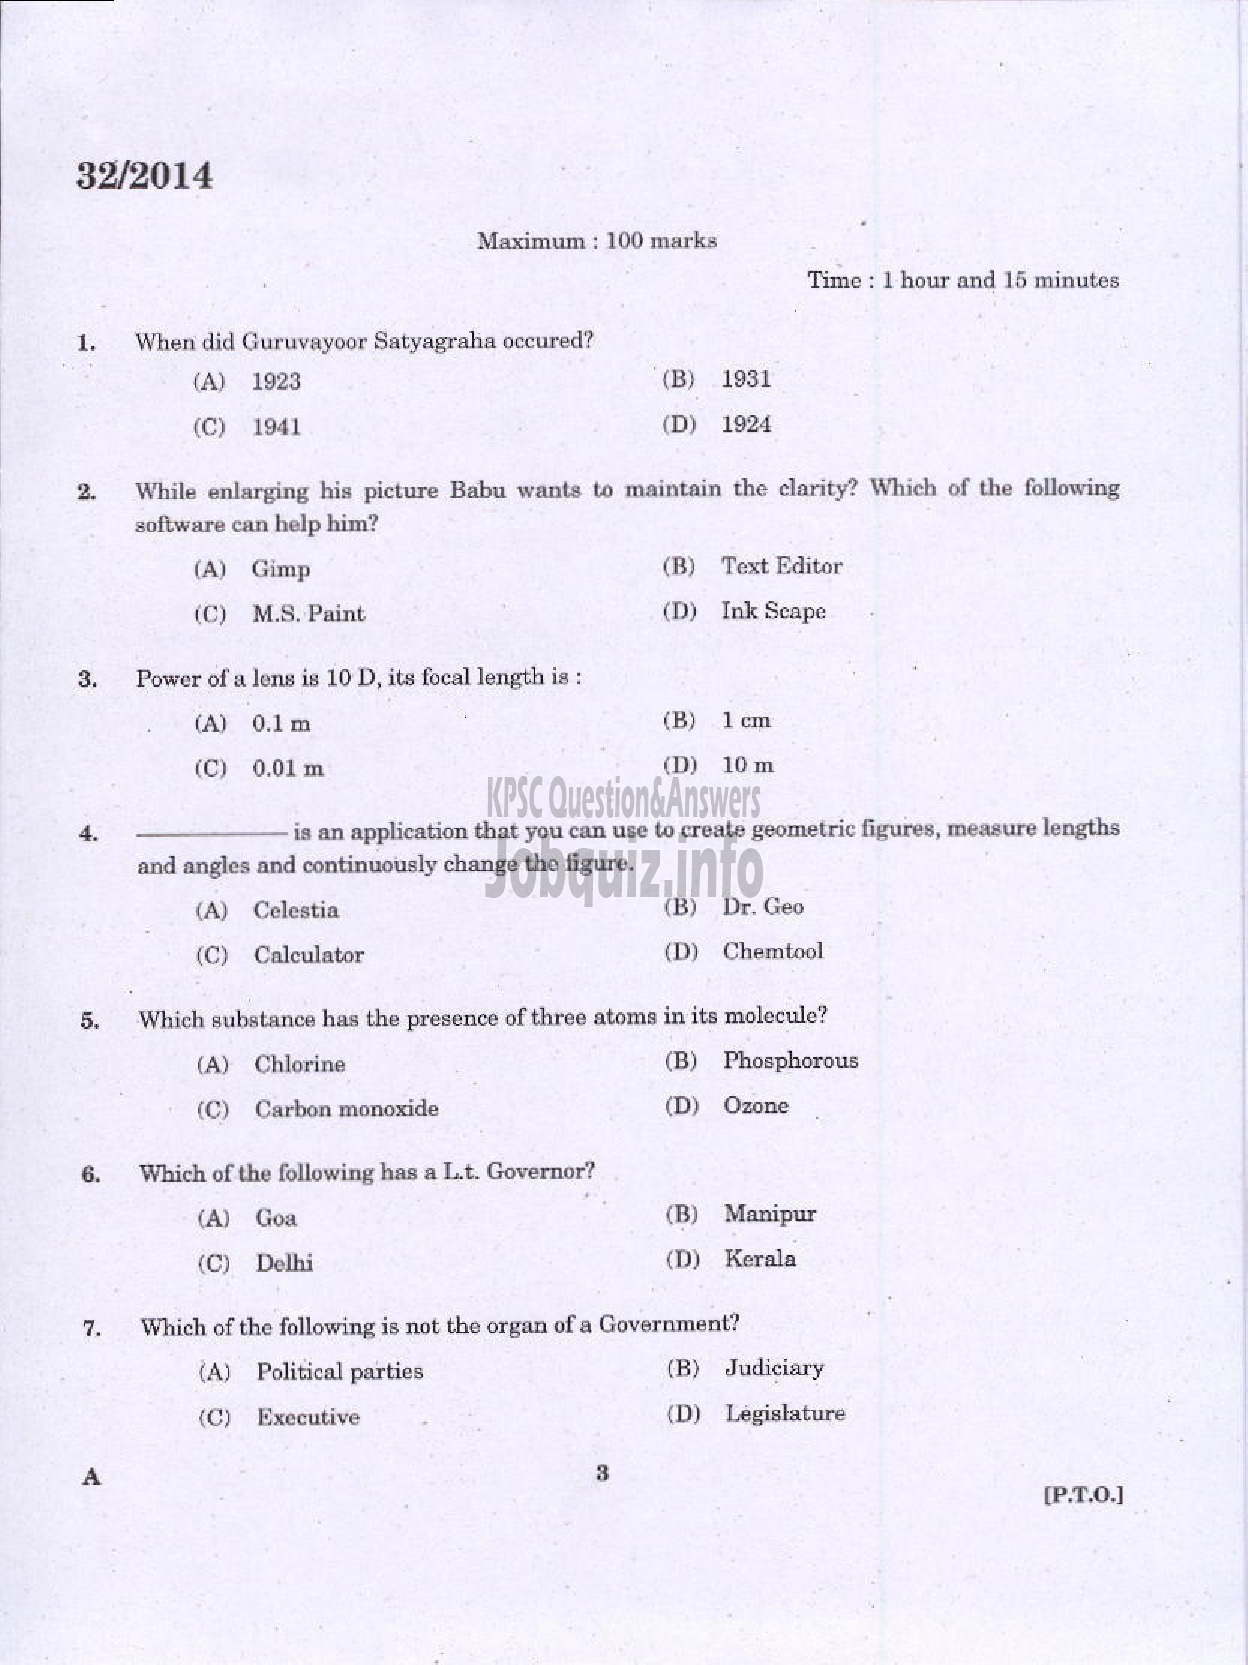 Kerala PSC Question Paper - LOWER DIVISION TYPIST NCA VARIOUS GOVERNMENT OWNED COMPANIES IDKY-1